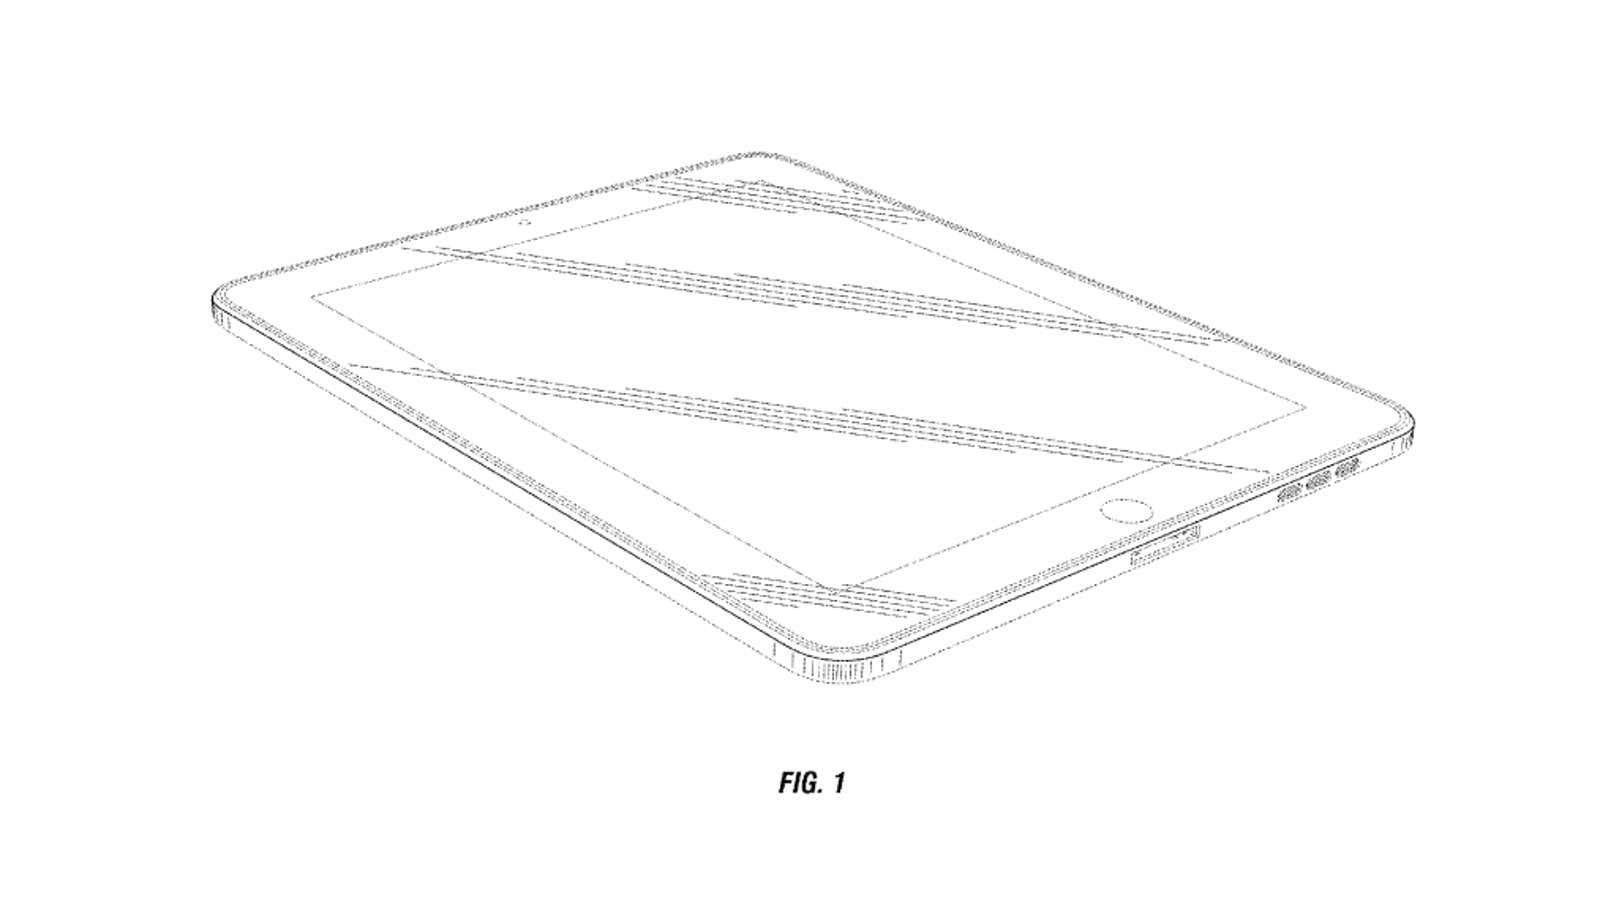 The relevant drawing from Apple&#39;s patent on a &amp;amp;amp;quot;Portable Display Device&amp;amp;amp;quot;